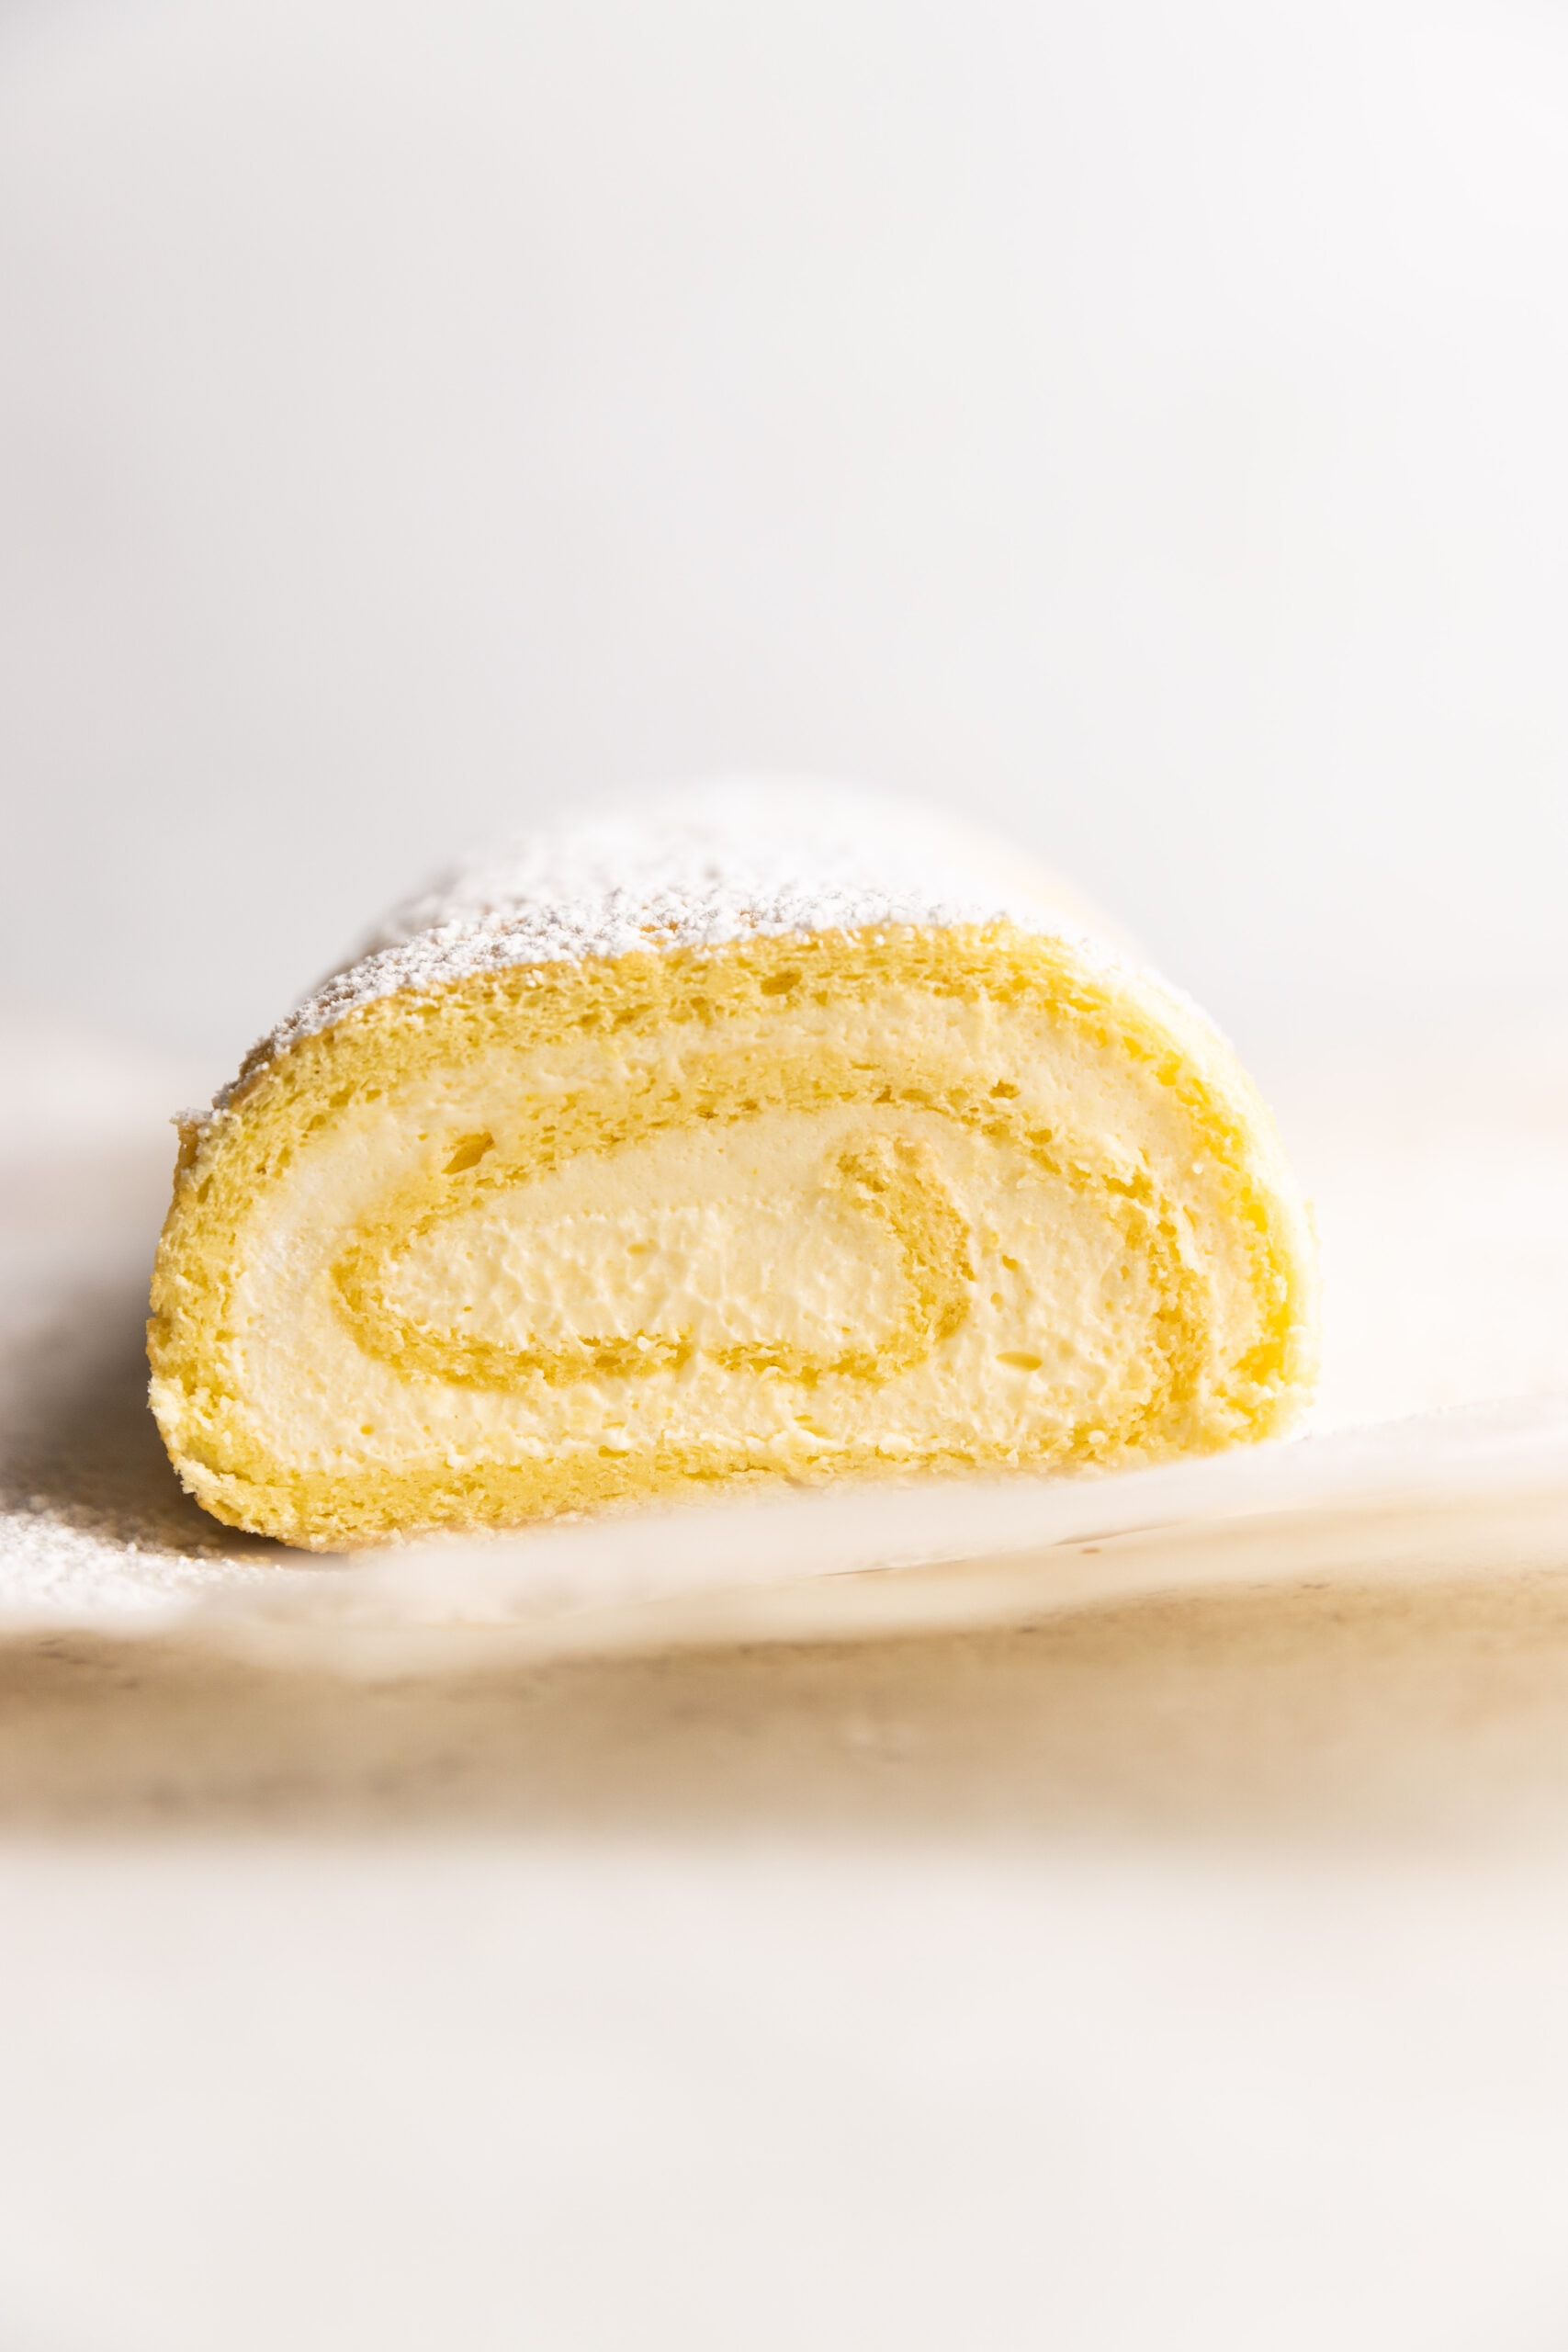 Cross section view of the Lemon Roulade cake with powdered sugar on top.